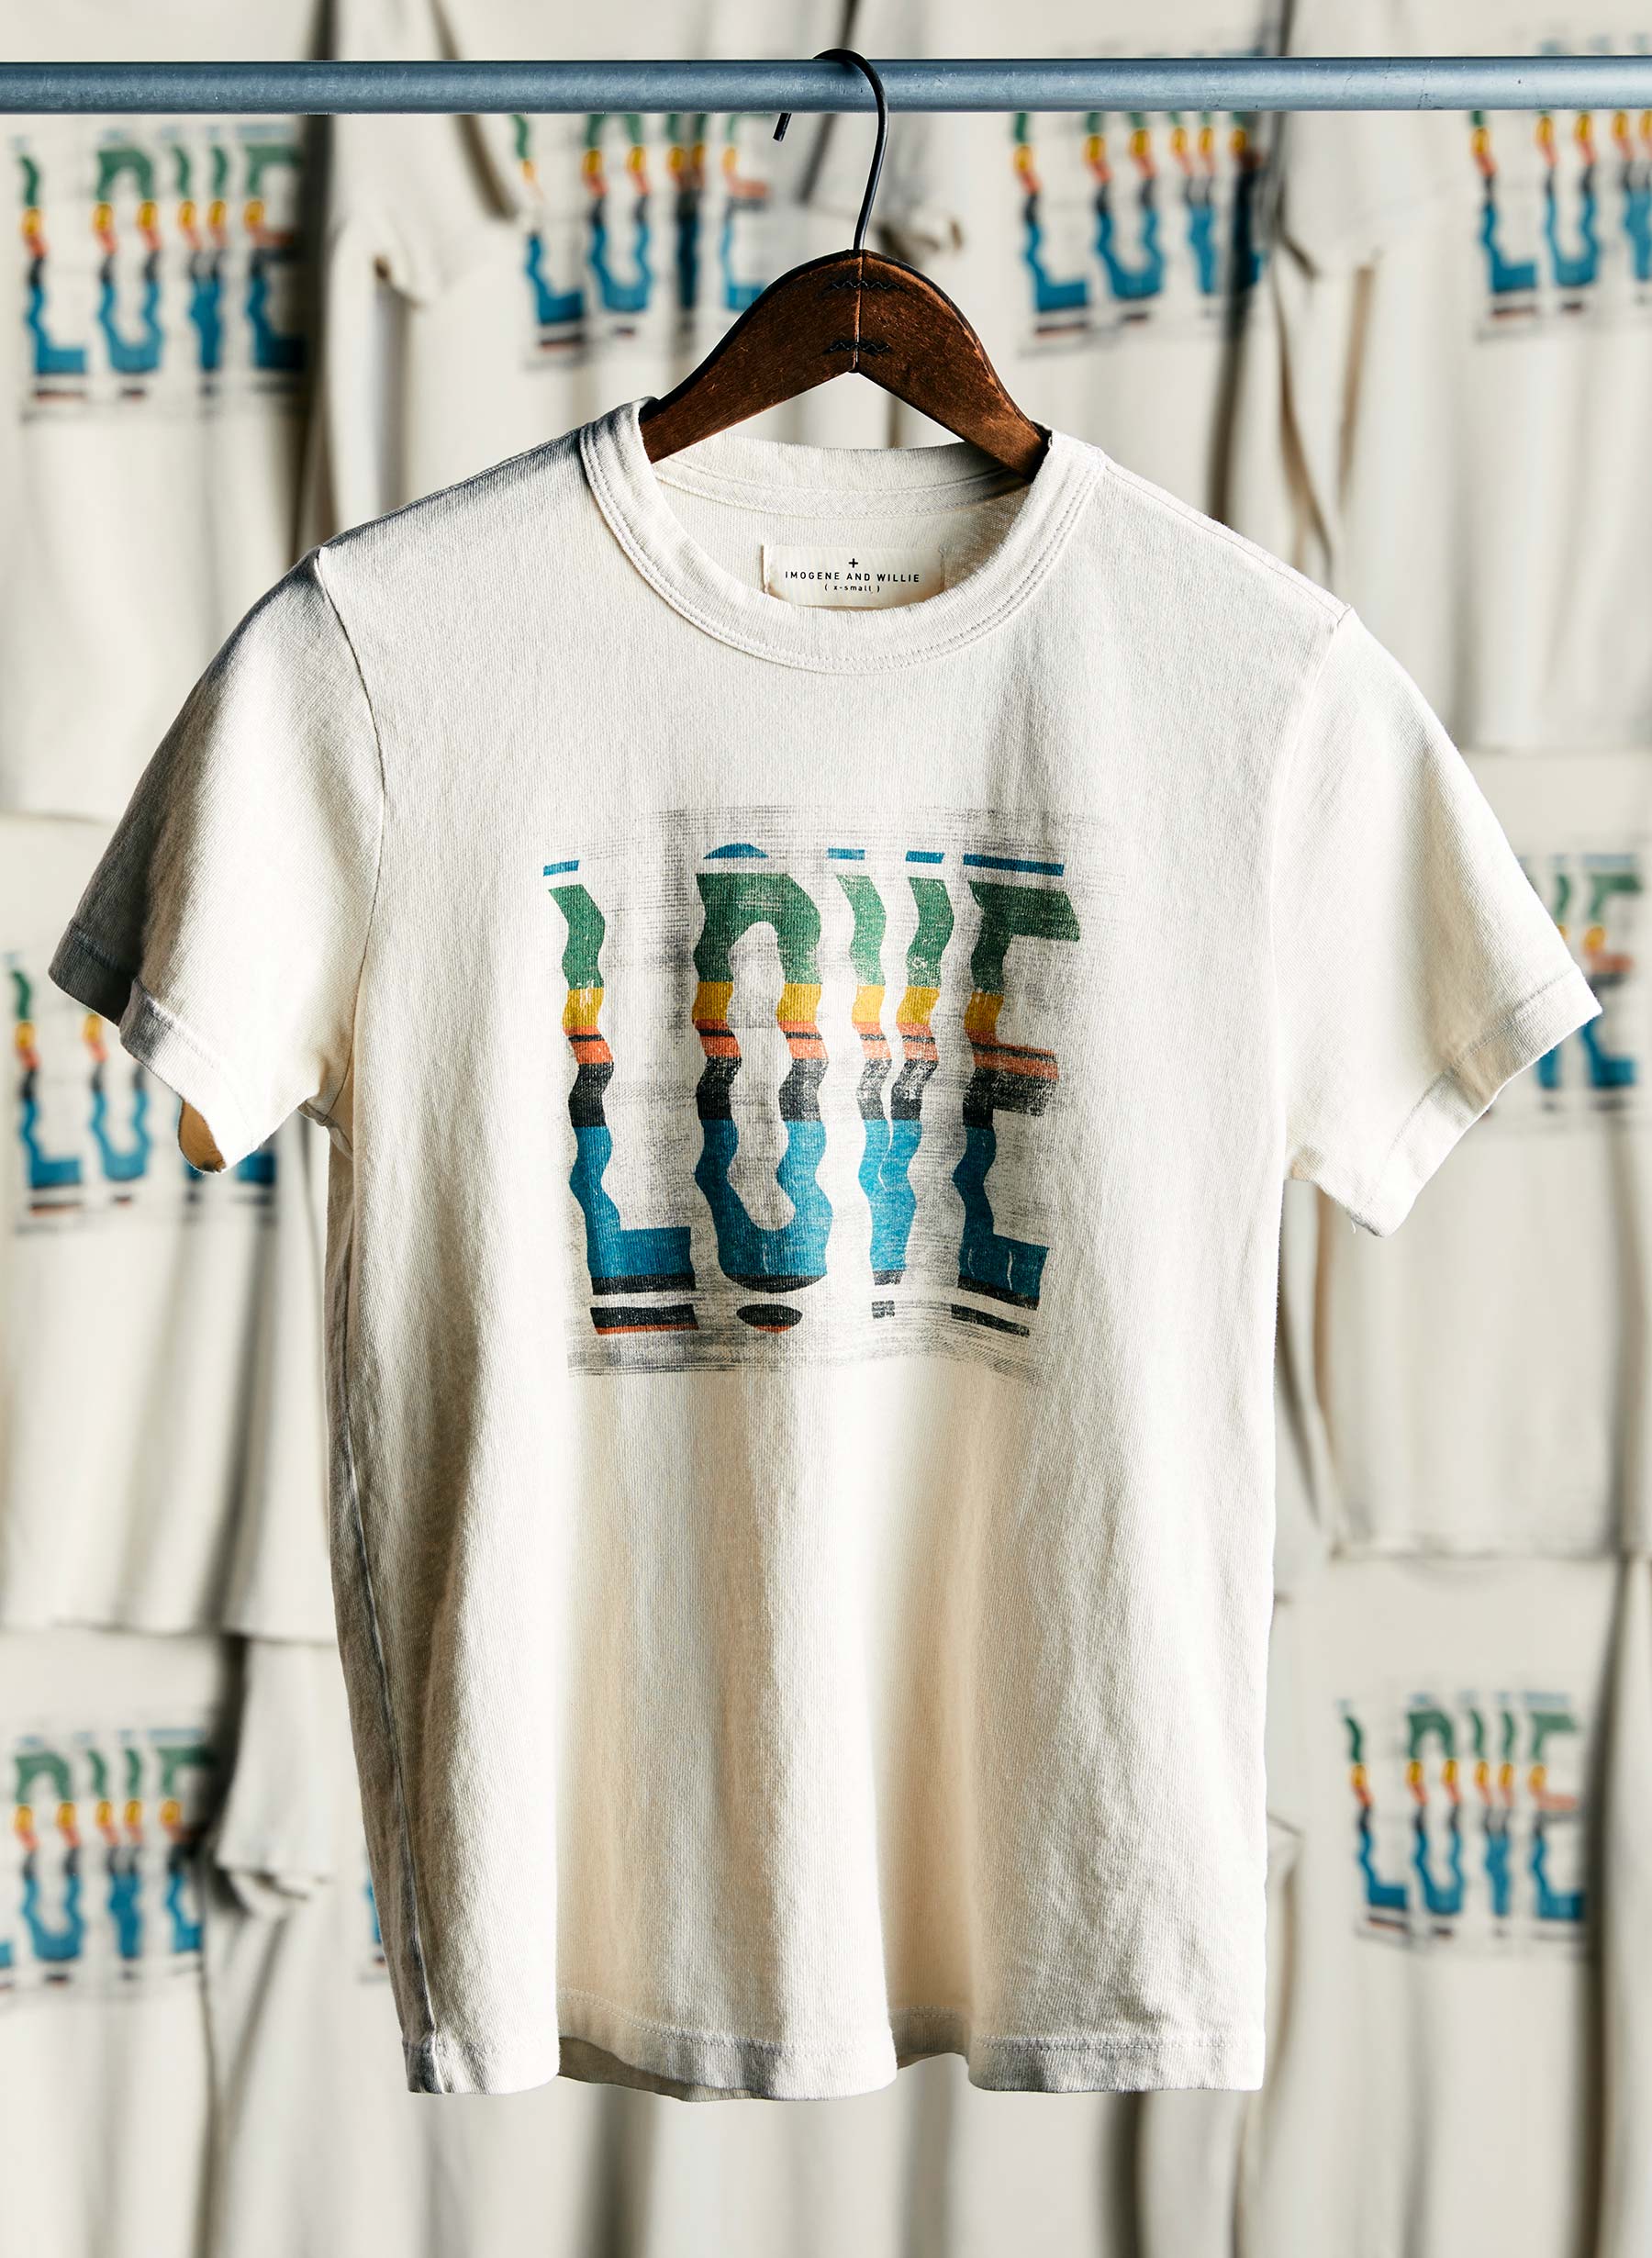 a white shirt with a colorful text on it